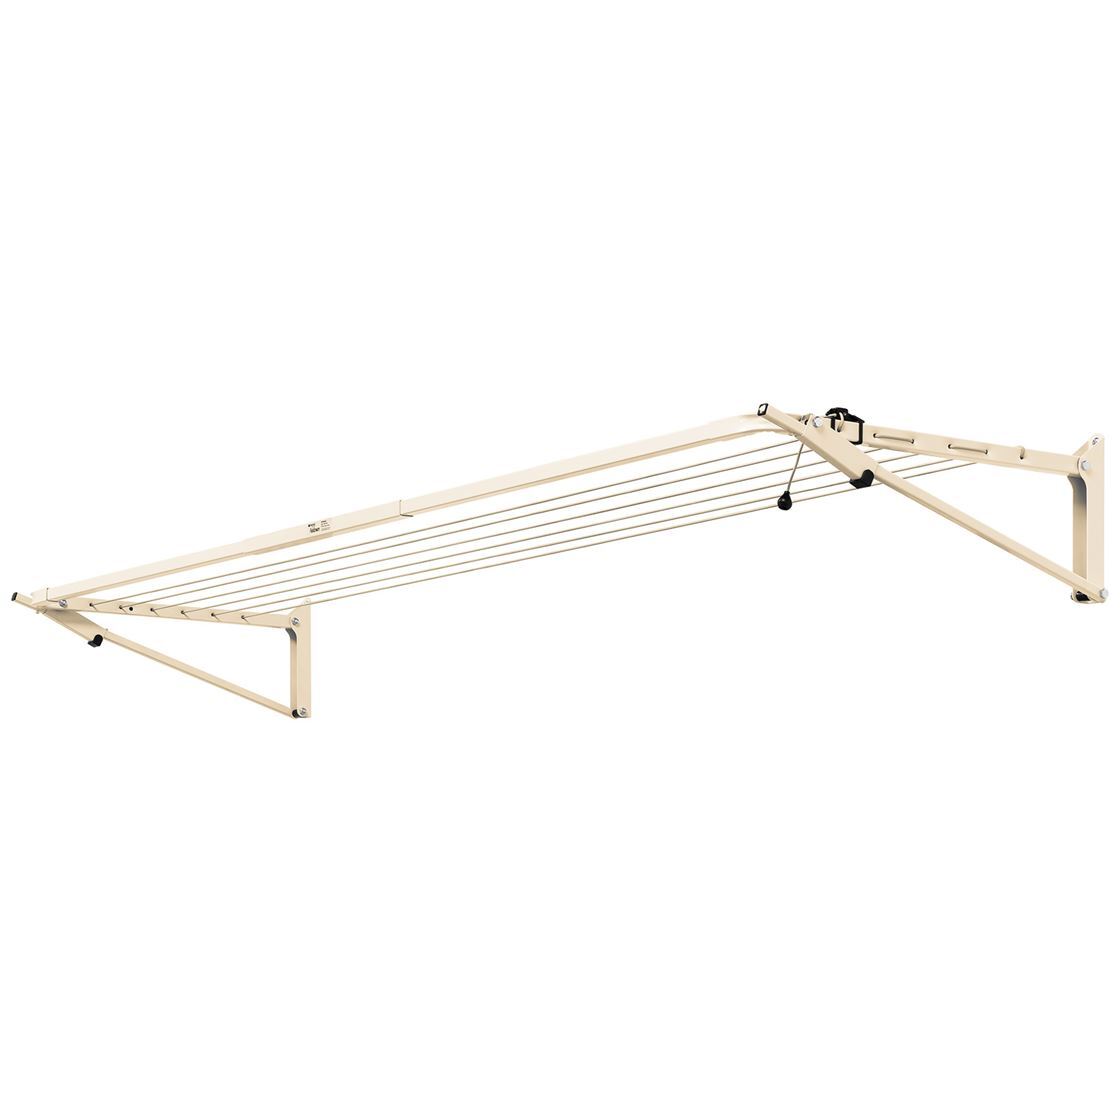 Hills Somerton Wall Mounted Indoor Airer Dryer BE225075